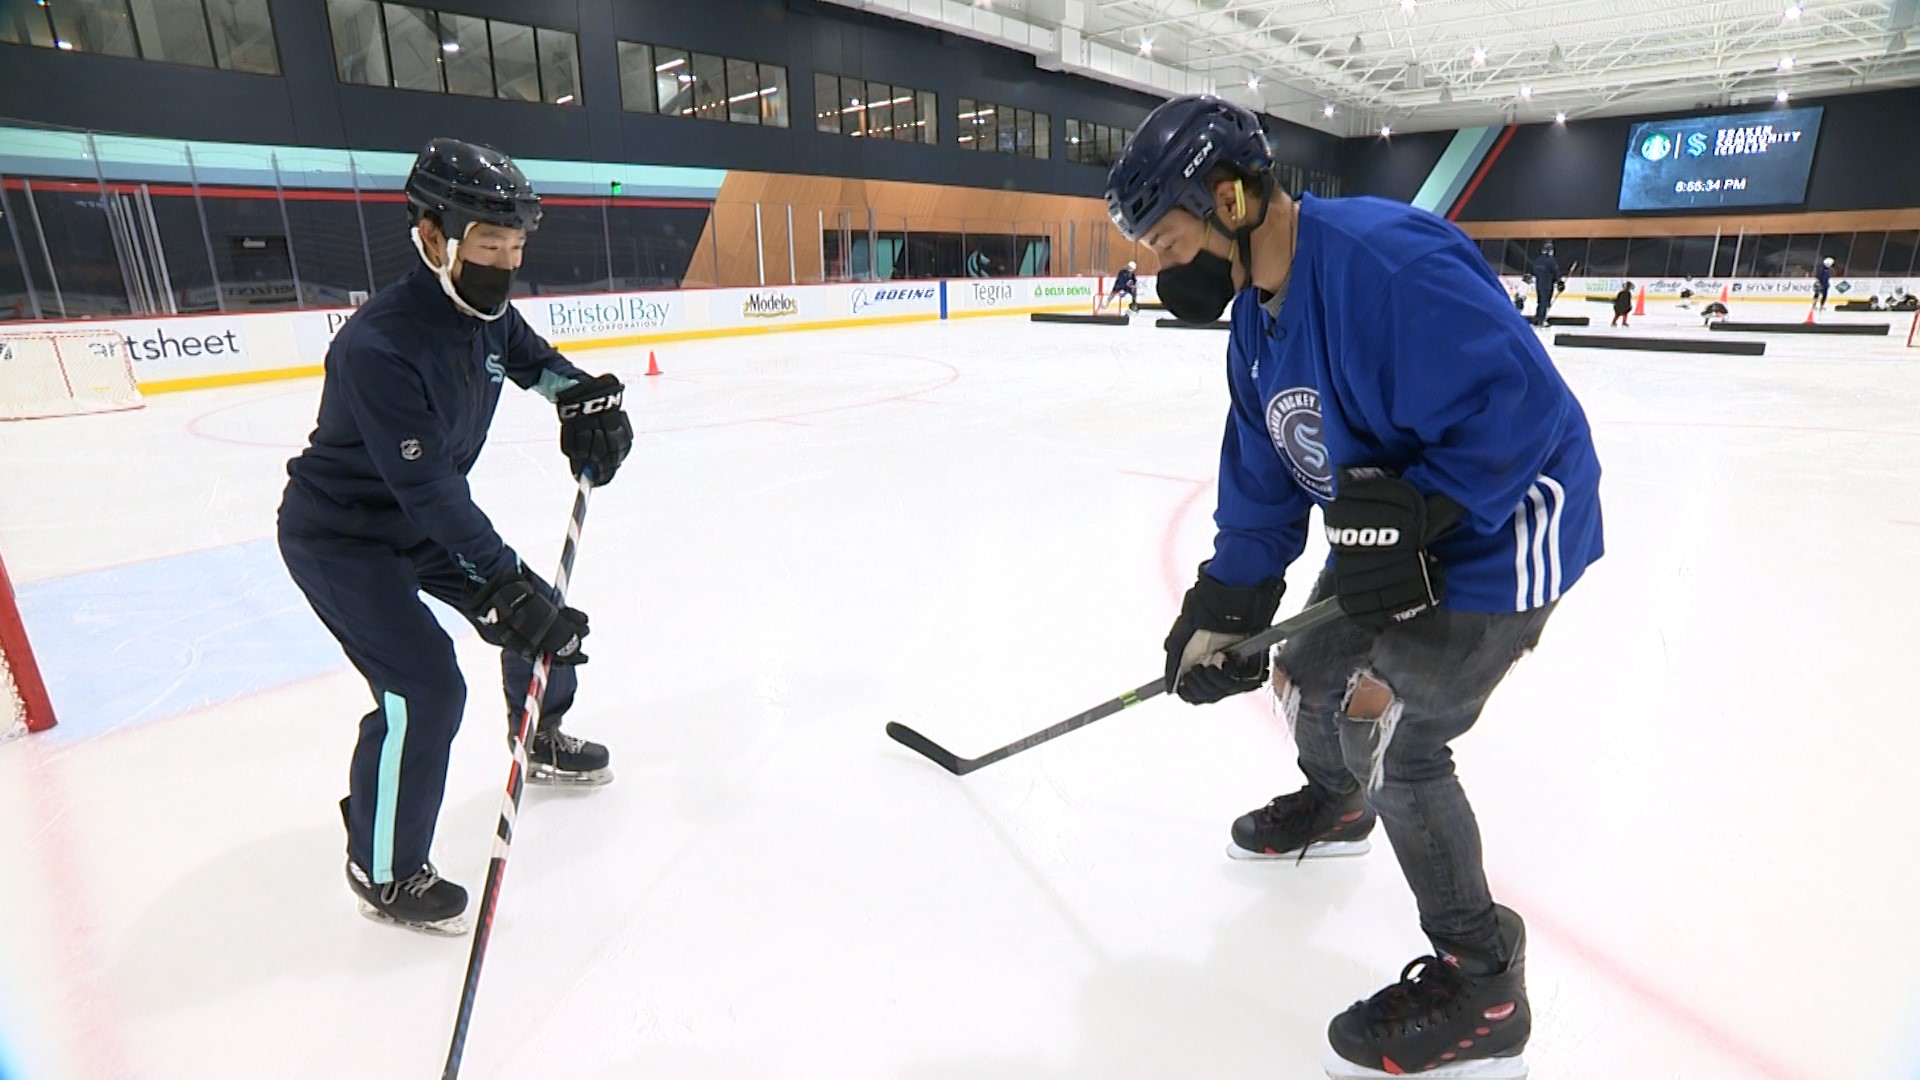 The facility in Seattle's Northgate has skating programs for kids and adults — including curling and broomball!